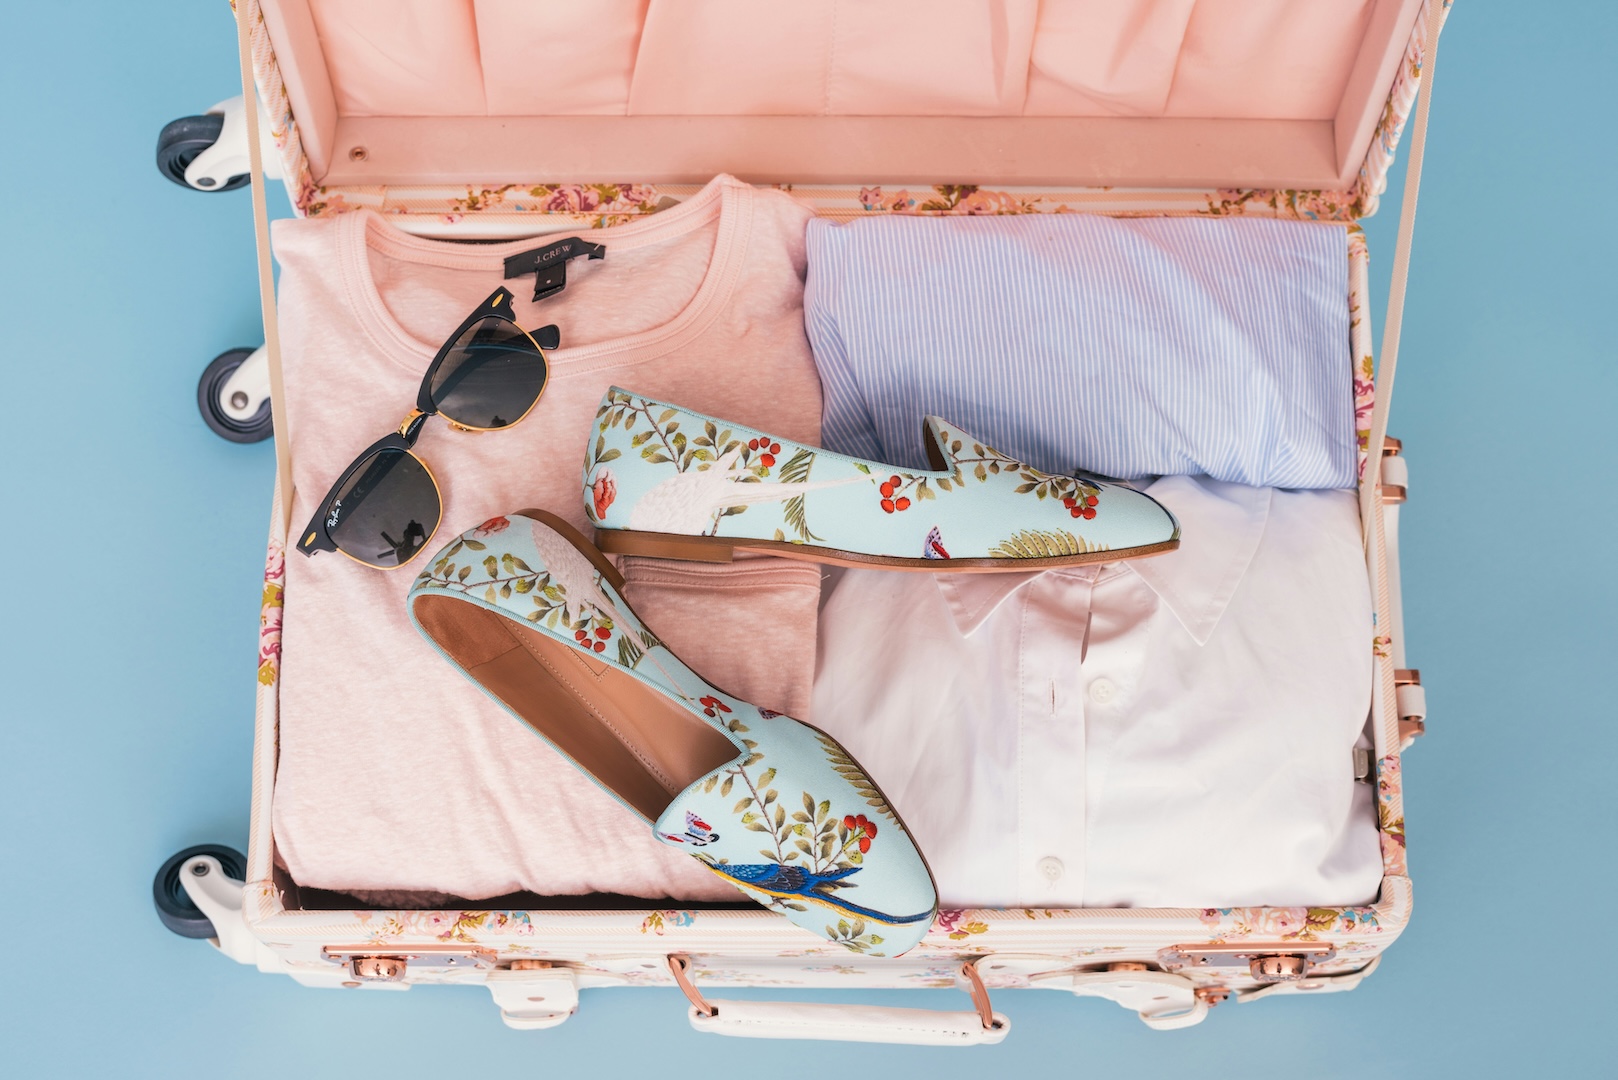 Packing suitcase for braless travel